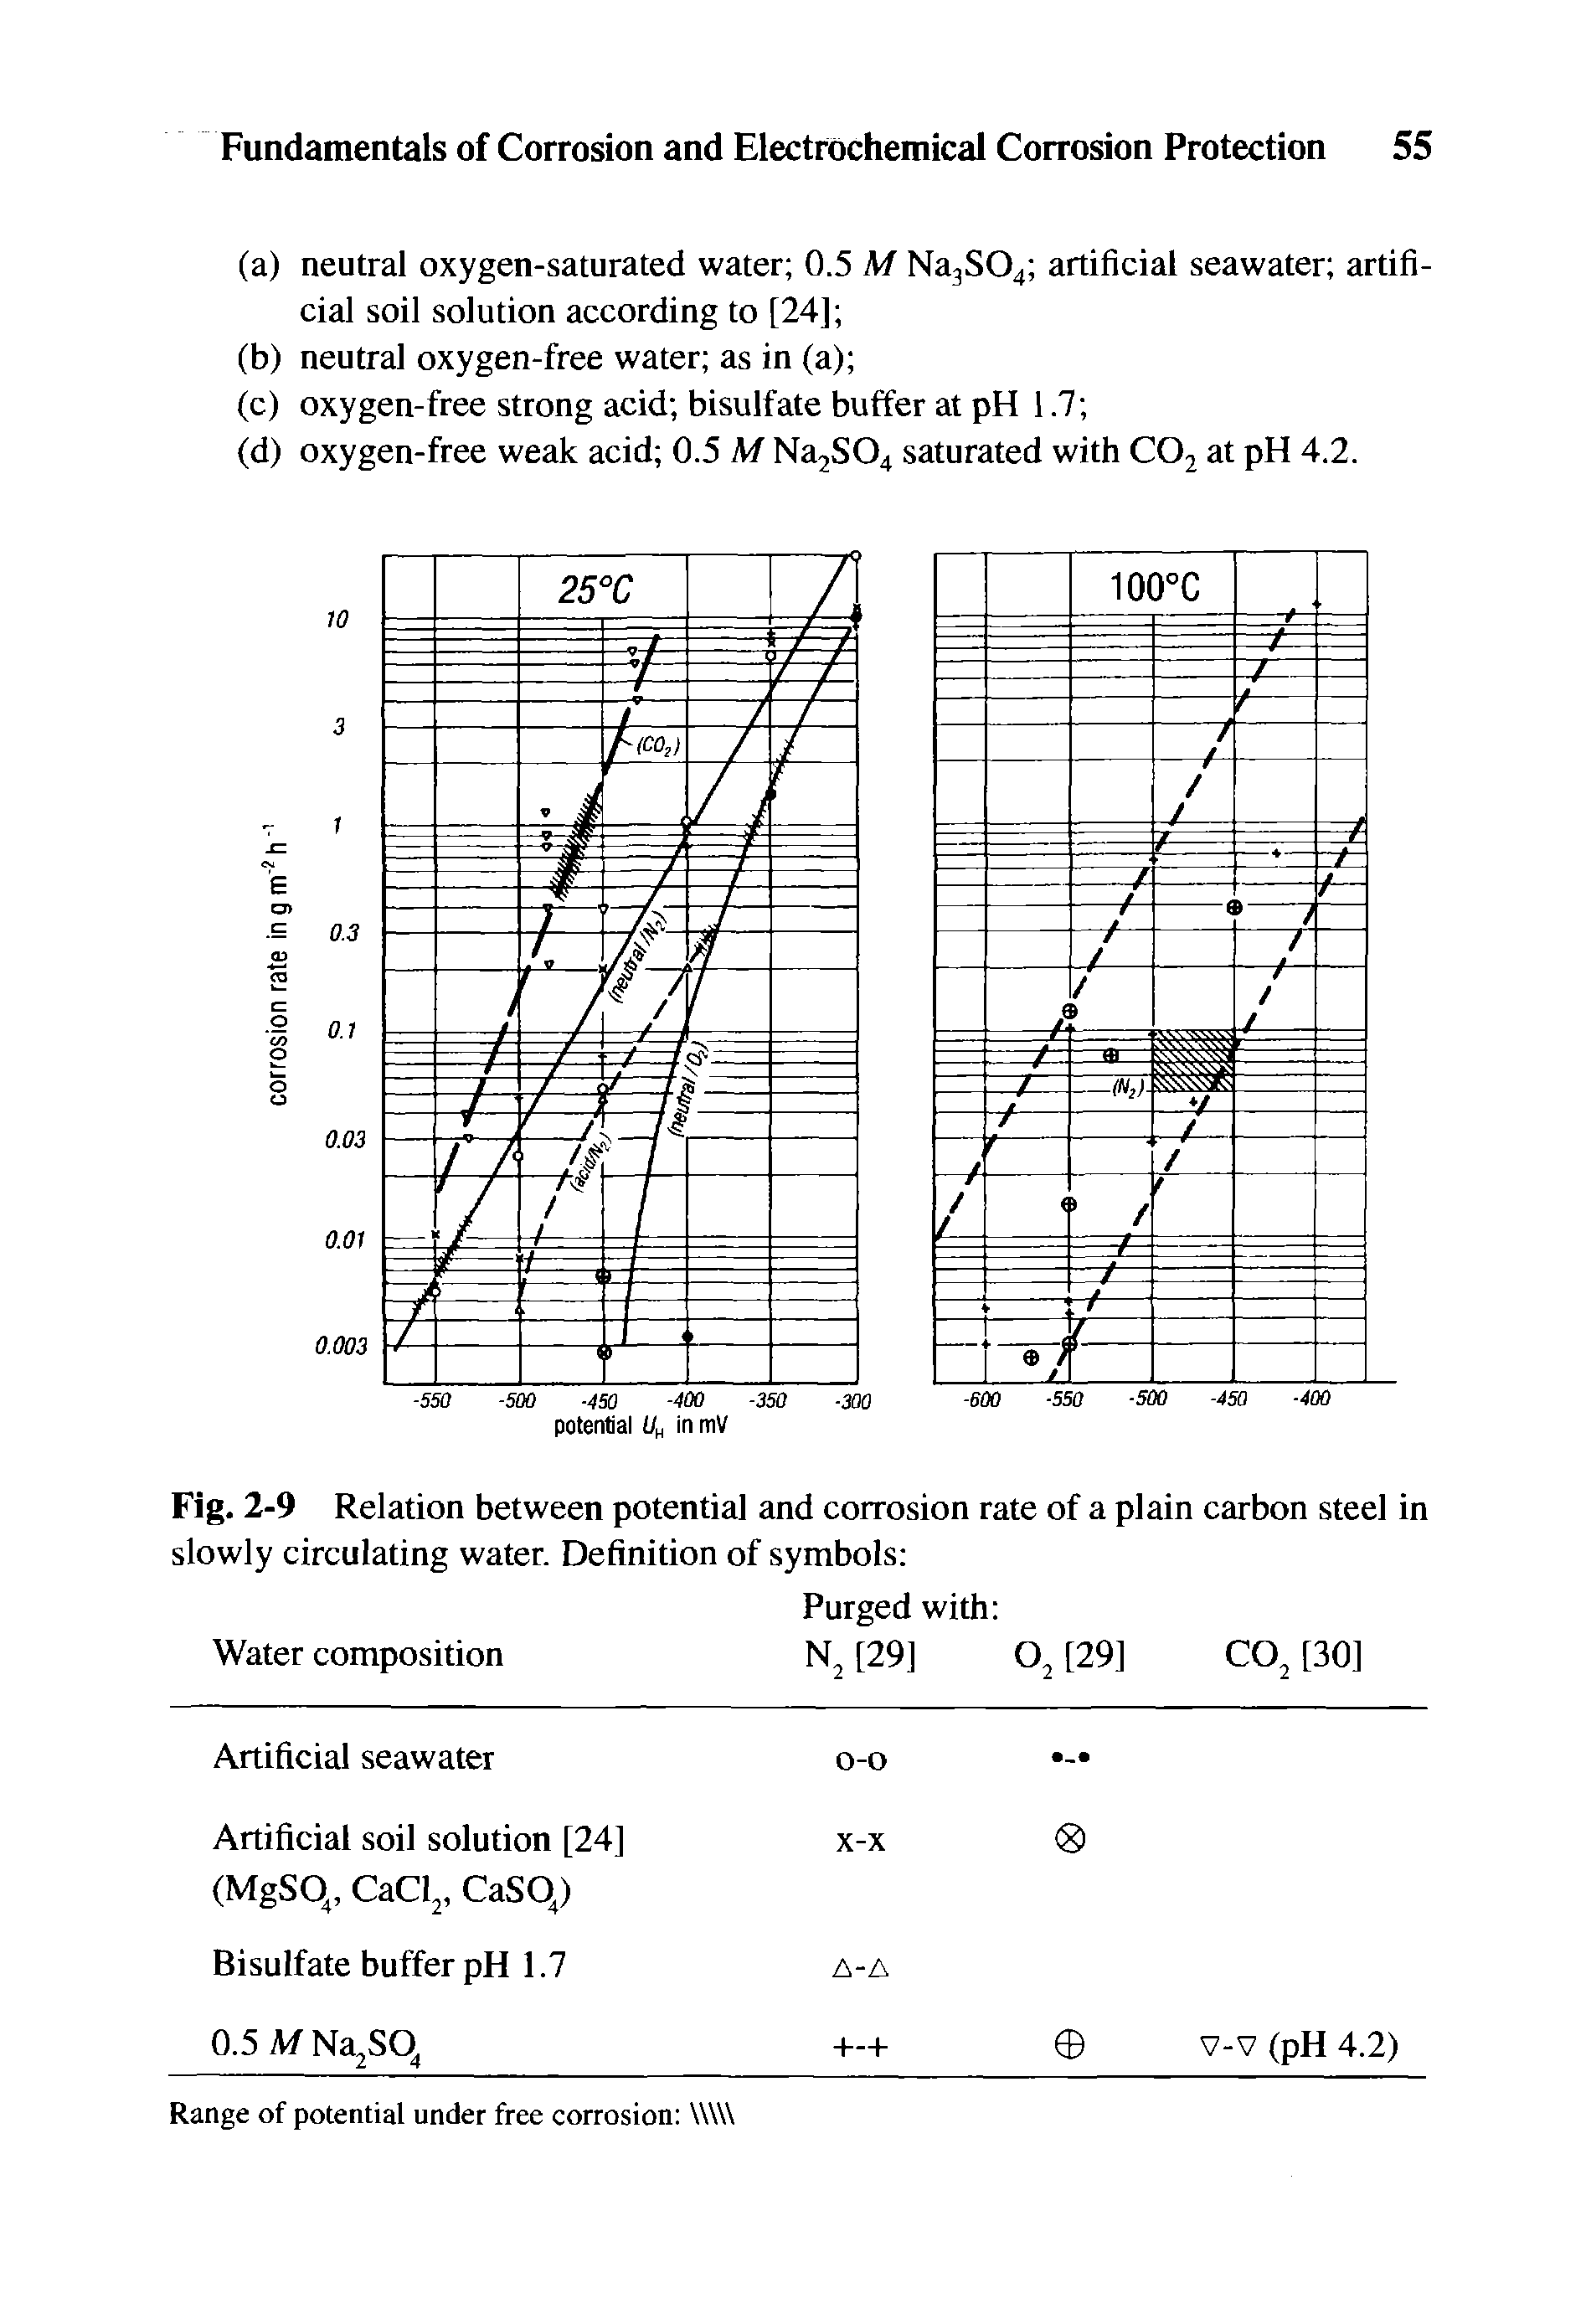 Fig. 2-9 Relation between potential and corrosion rate of a plain carbon steel in slowly circulating water. Definition of symbols ...